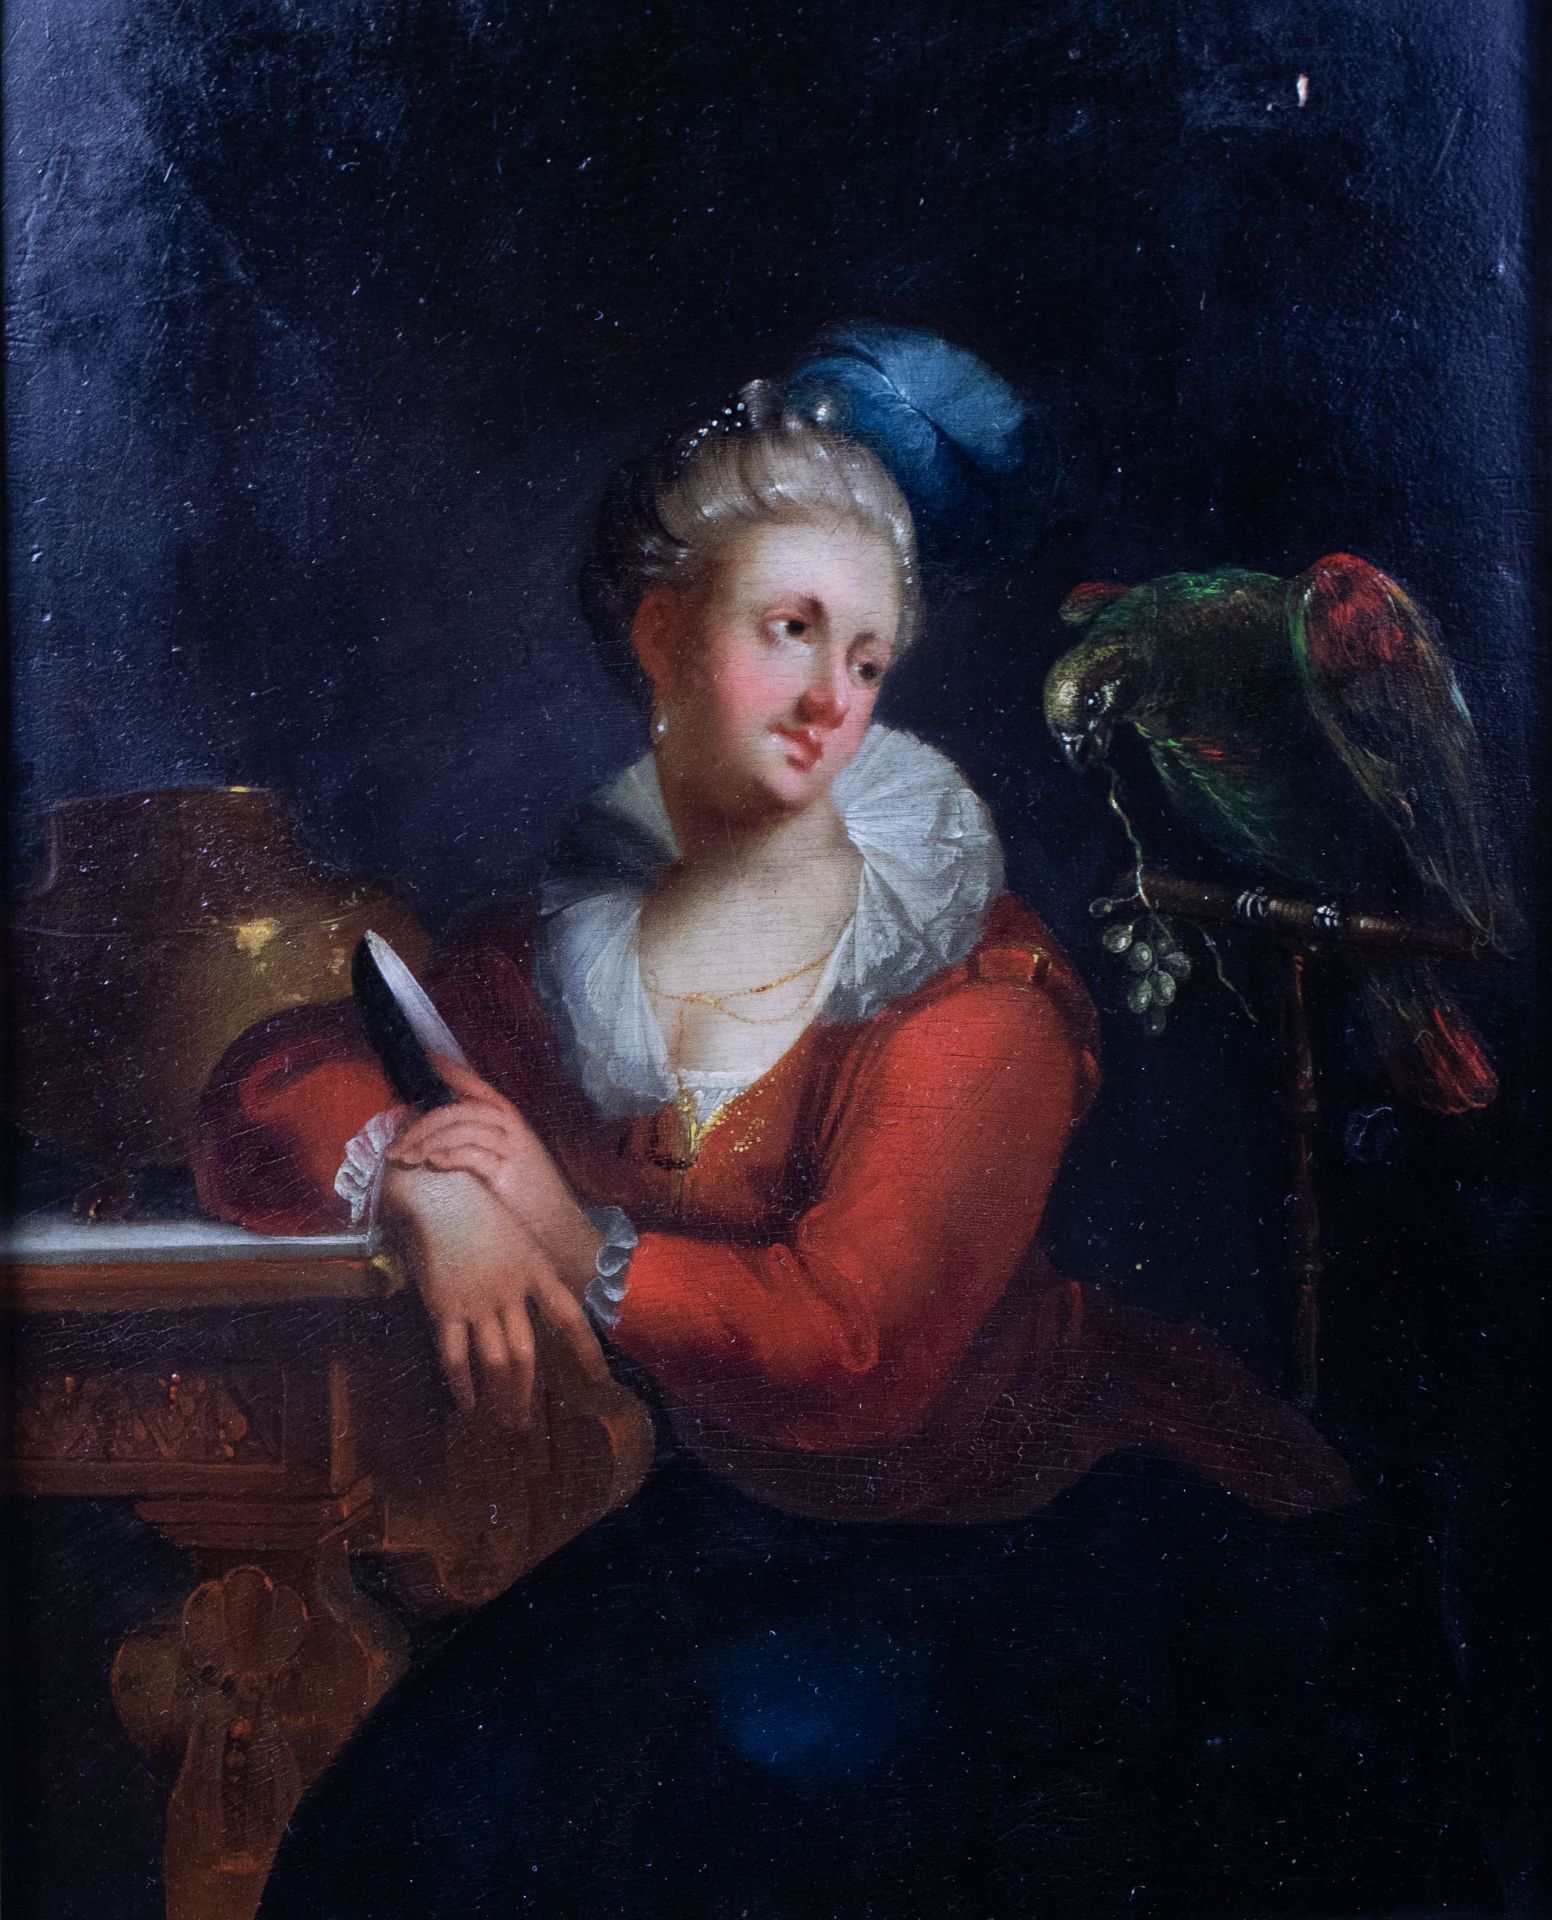 Lady with Parrot, 18thC